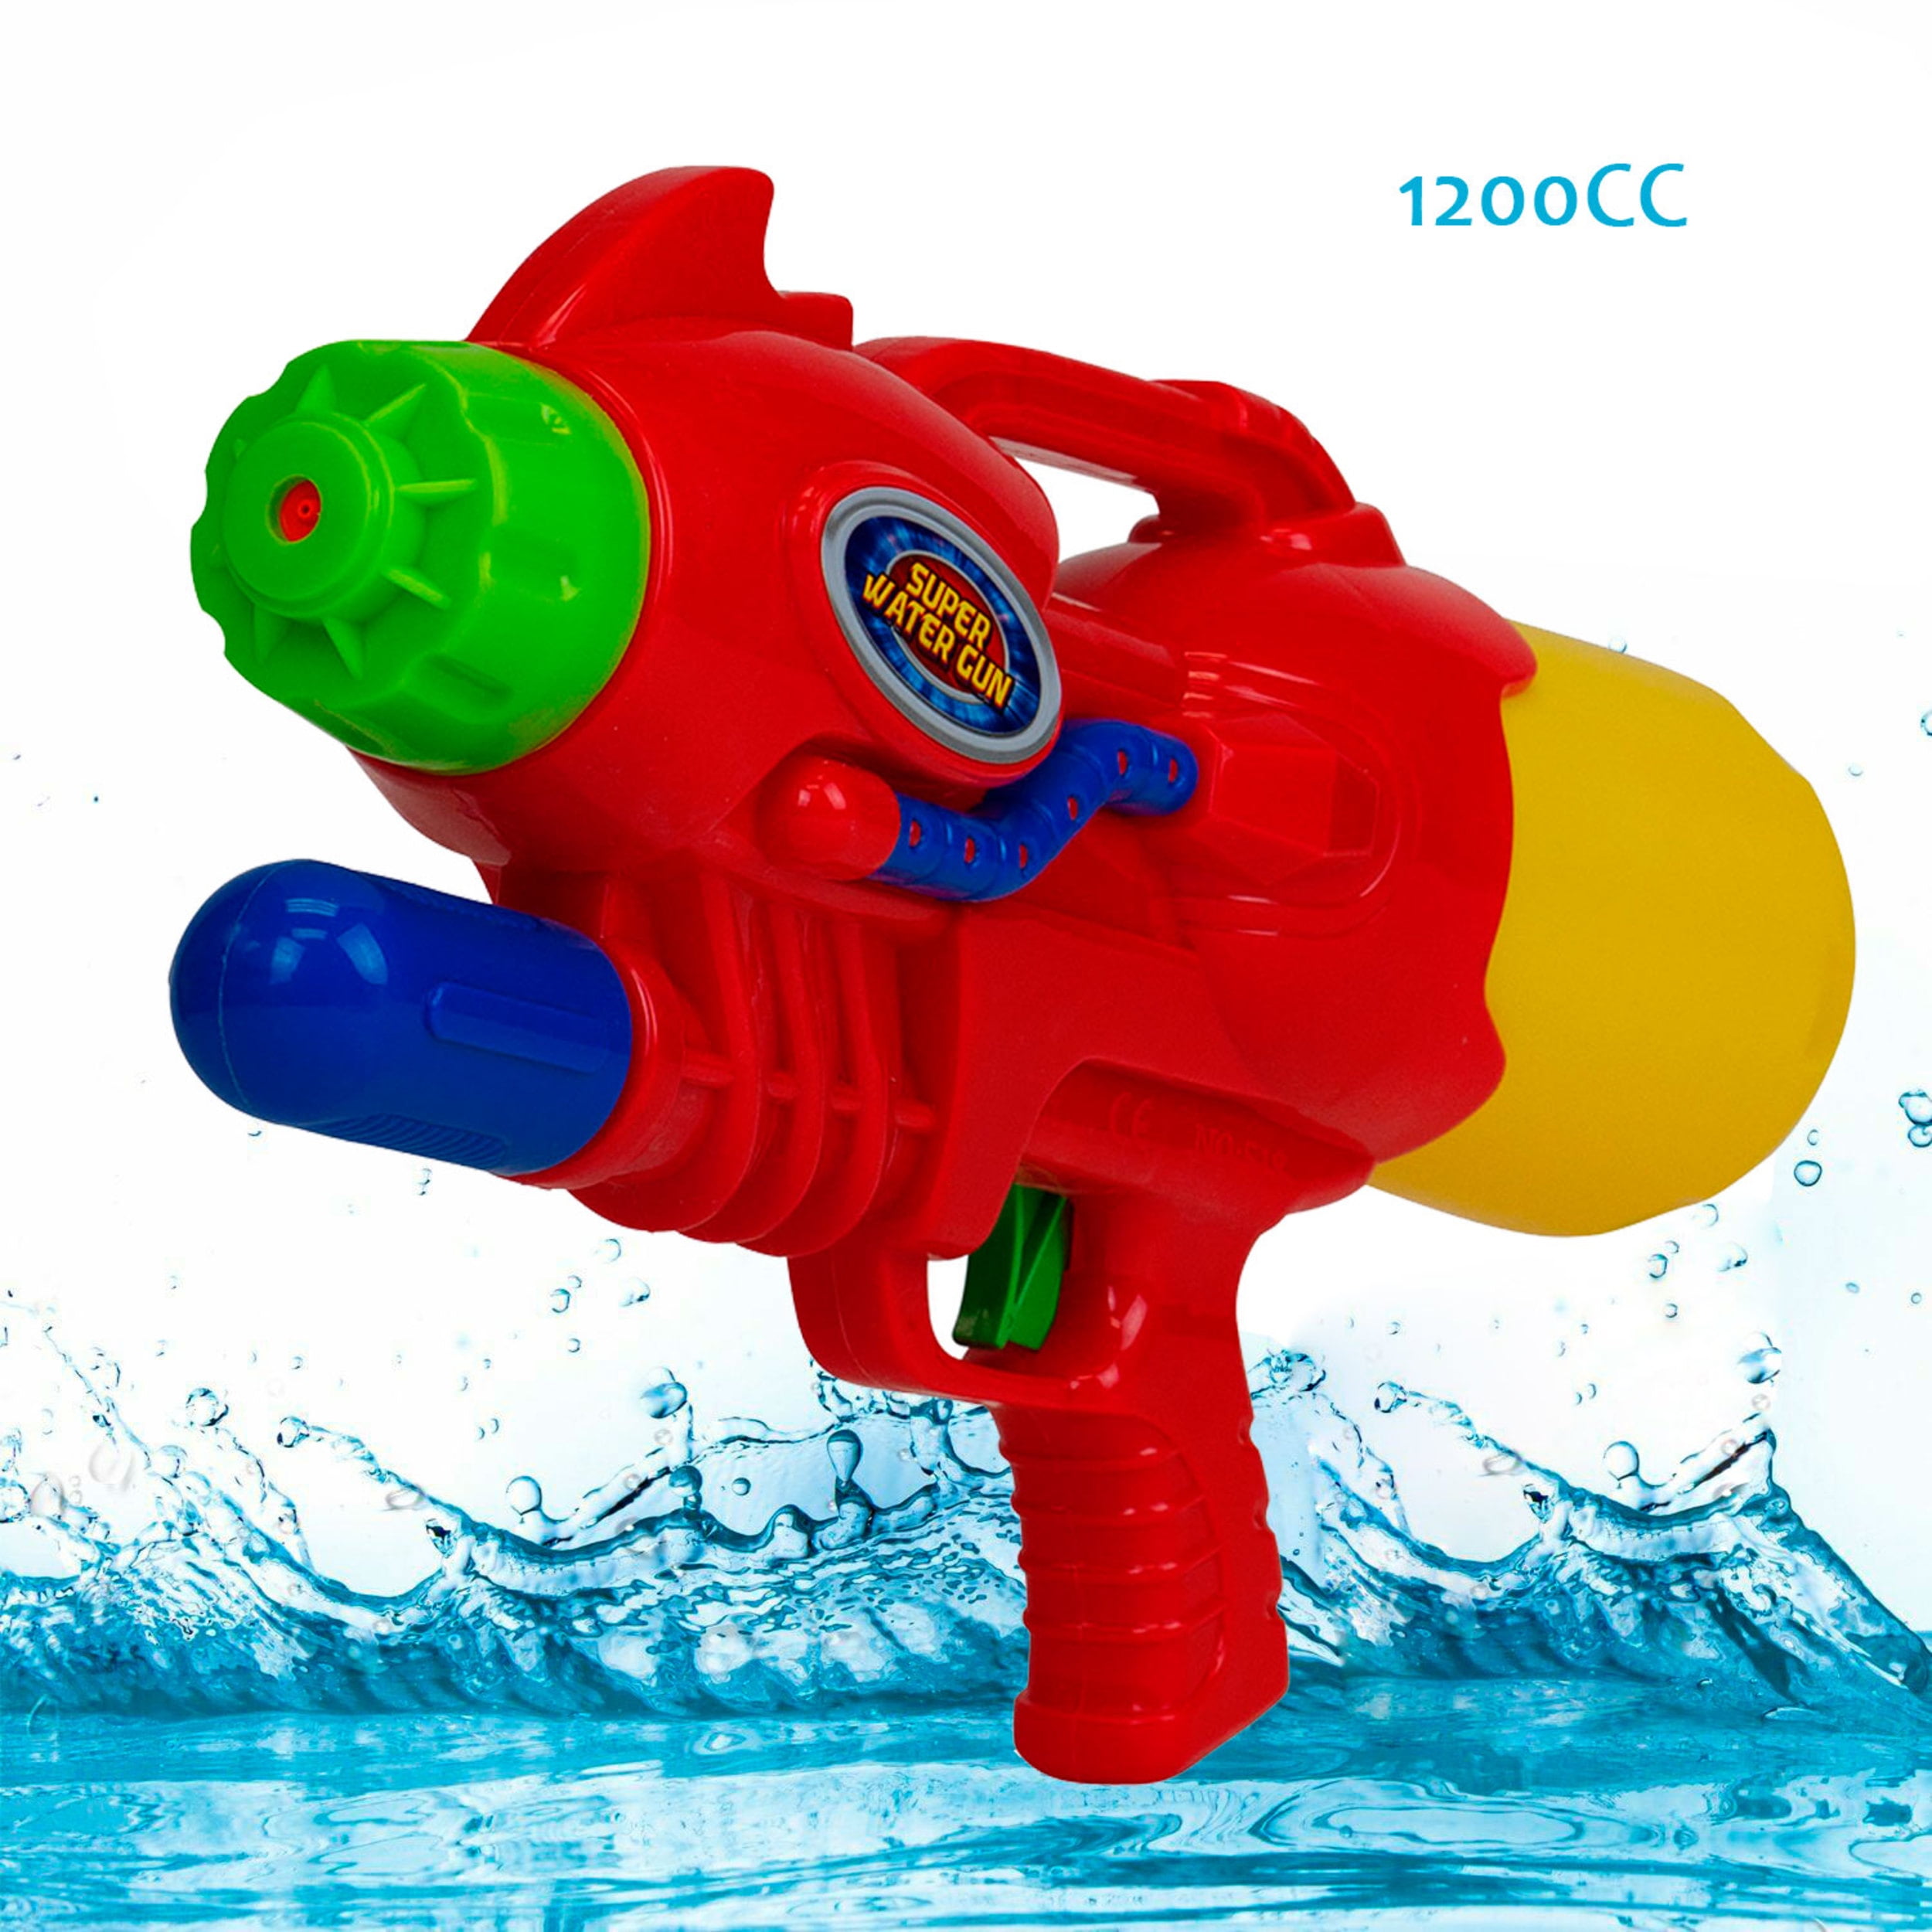 Retro Toys & Games Ray Gun Water Squirters Pistol Red Yellow Outdoor Summer Fun 